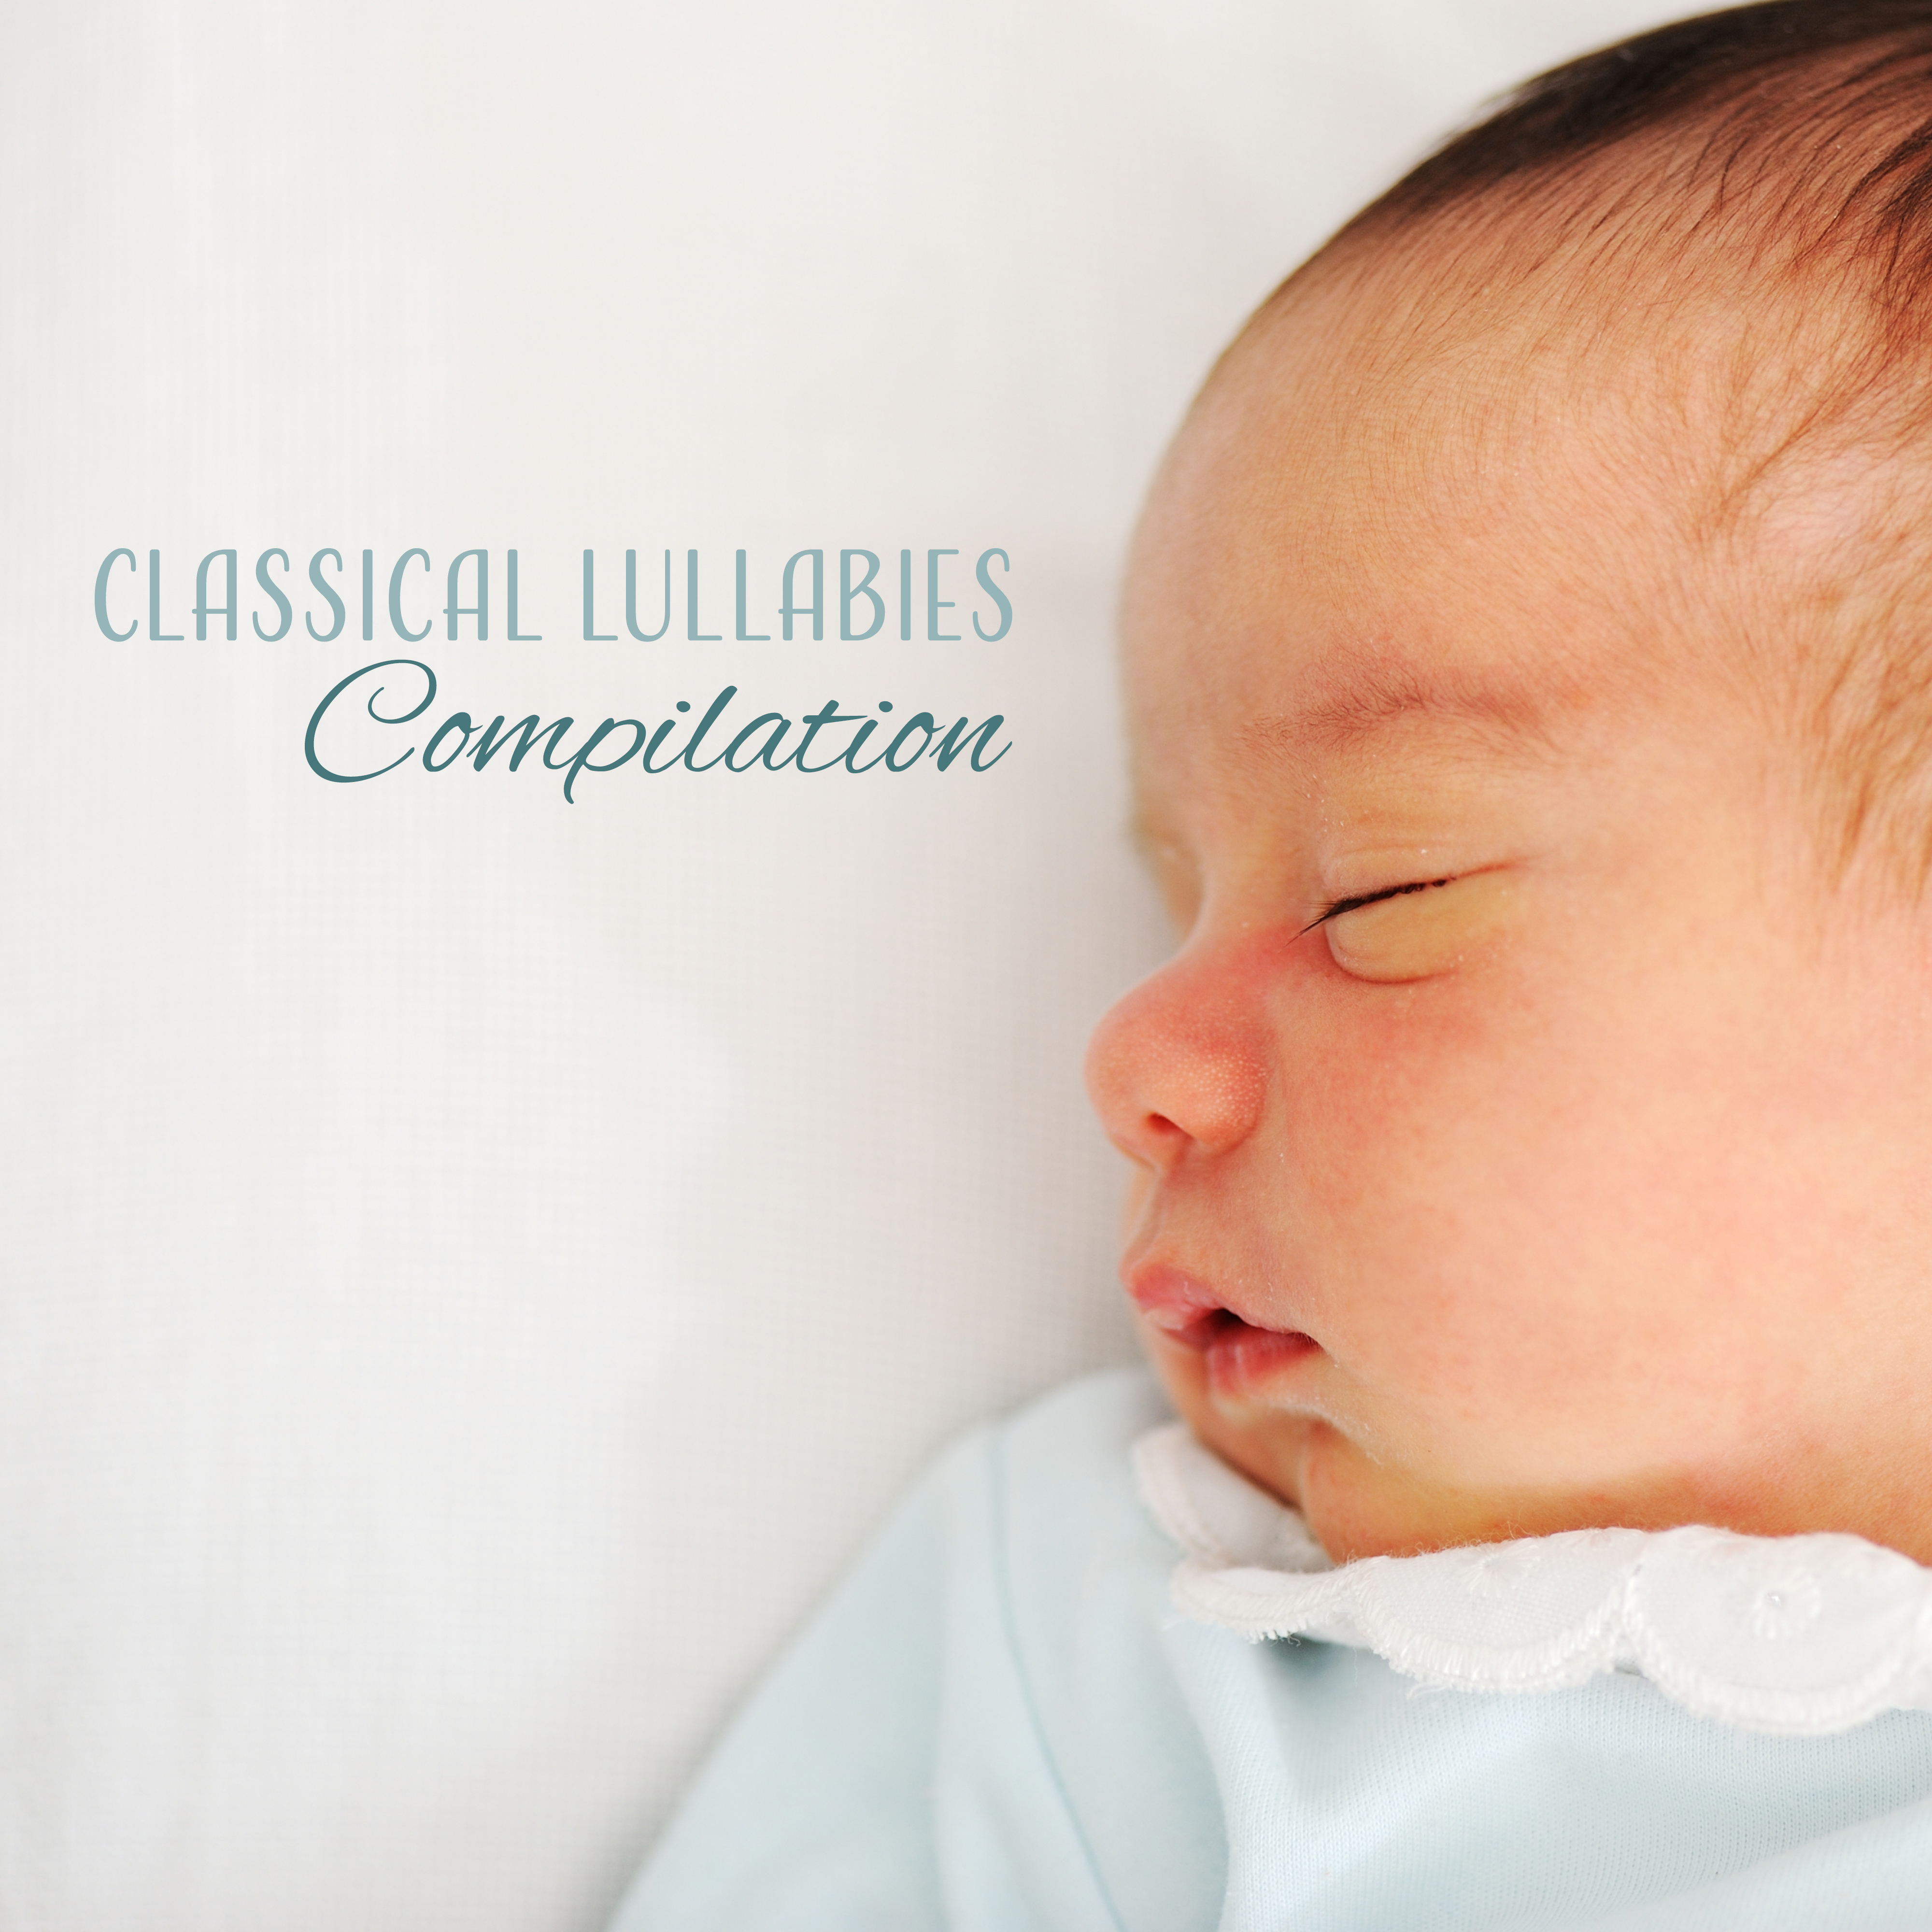 Classical Lullabies Compilation – Relaxing Songs for Babies, Classical Music, Lullabies, Sweet Dreams, Sleepless Nights